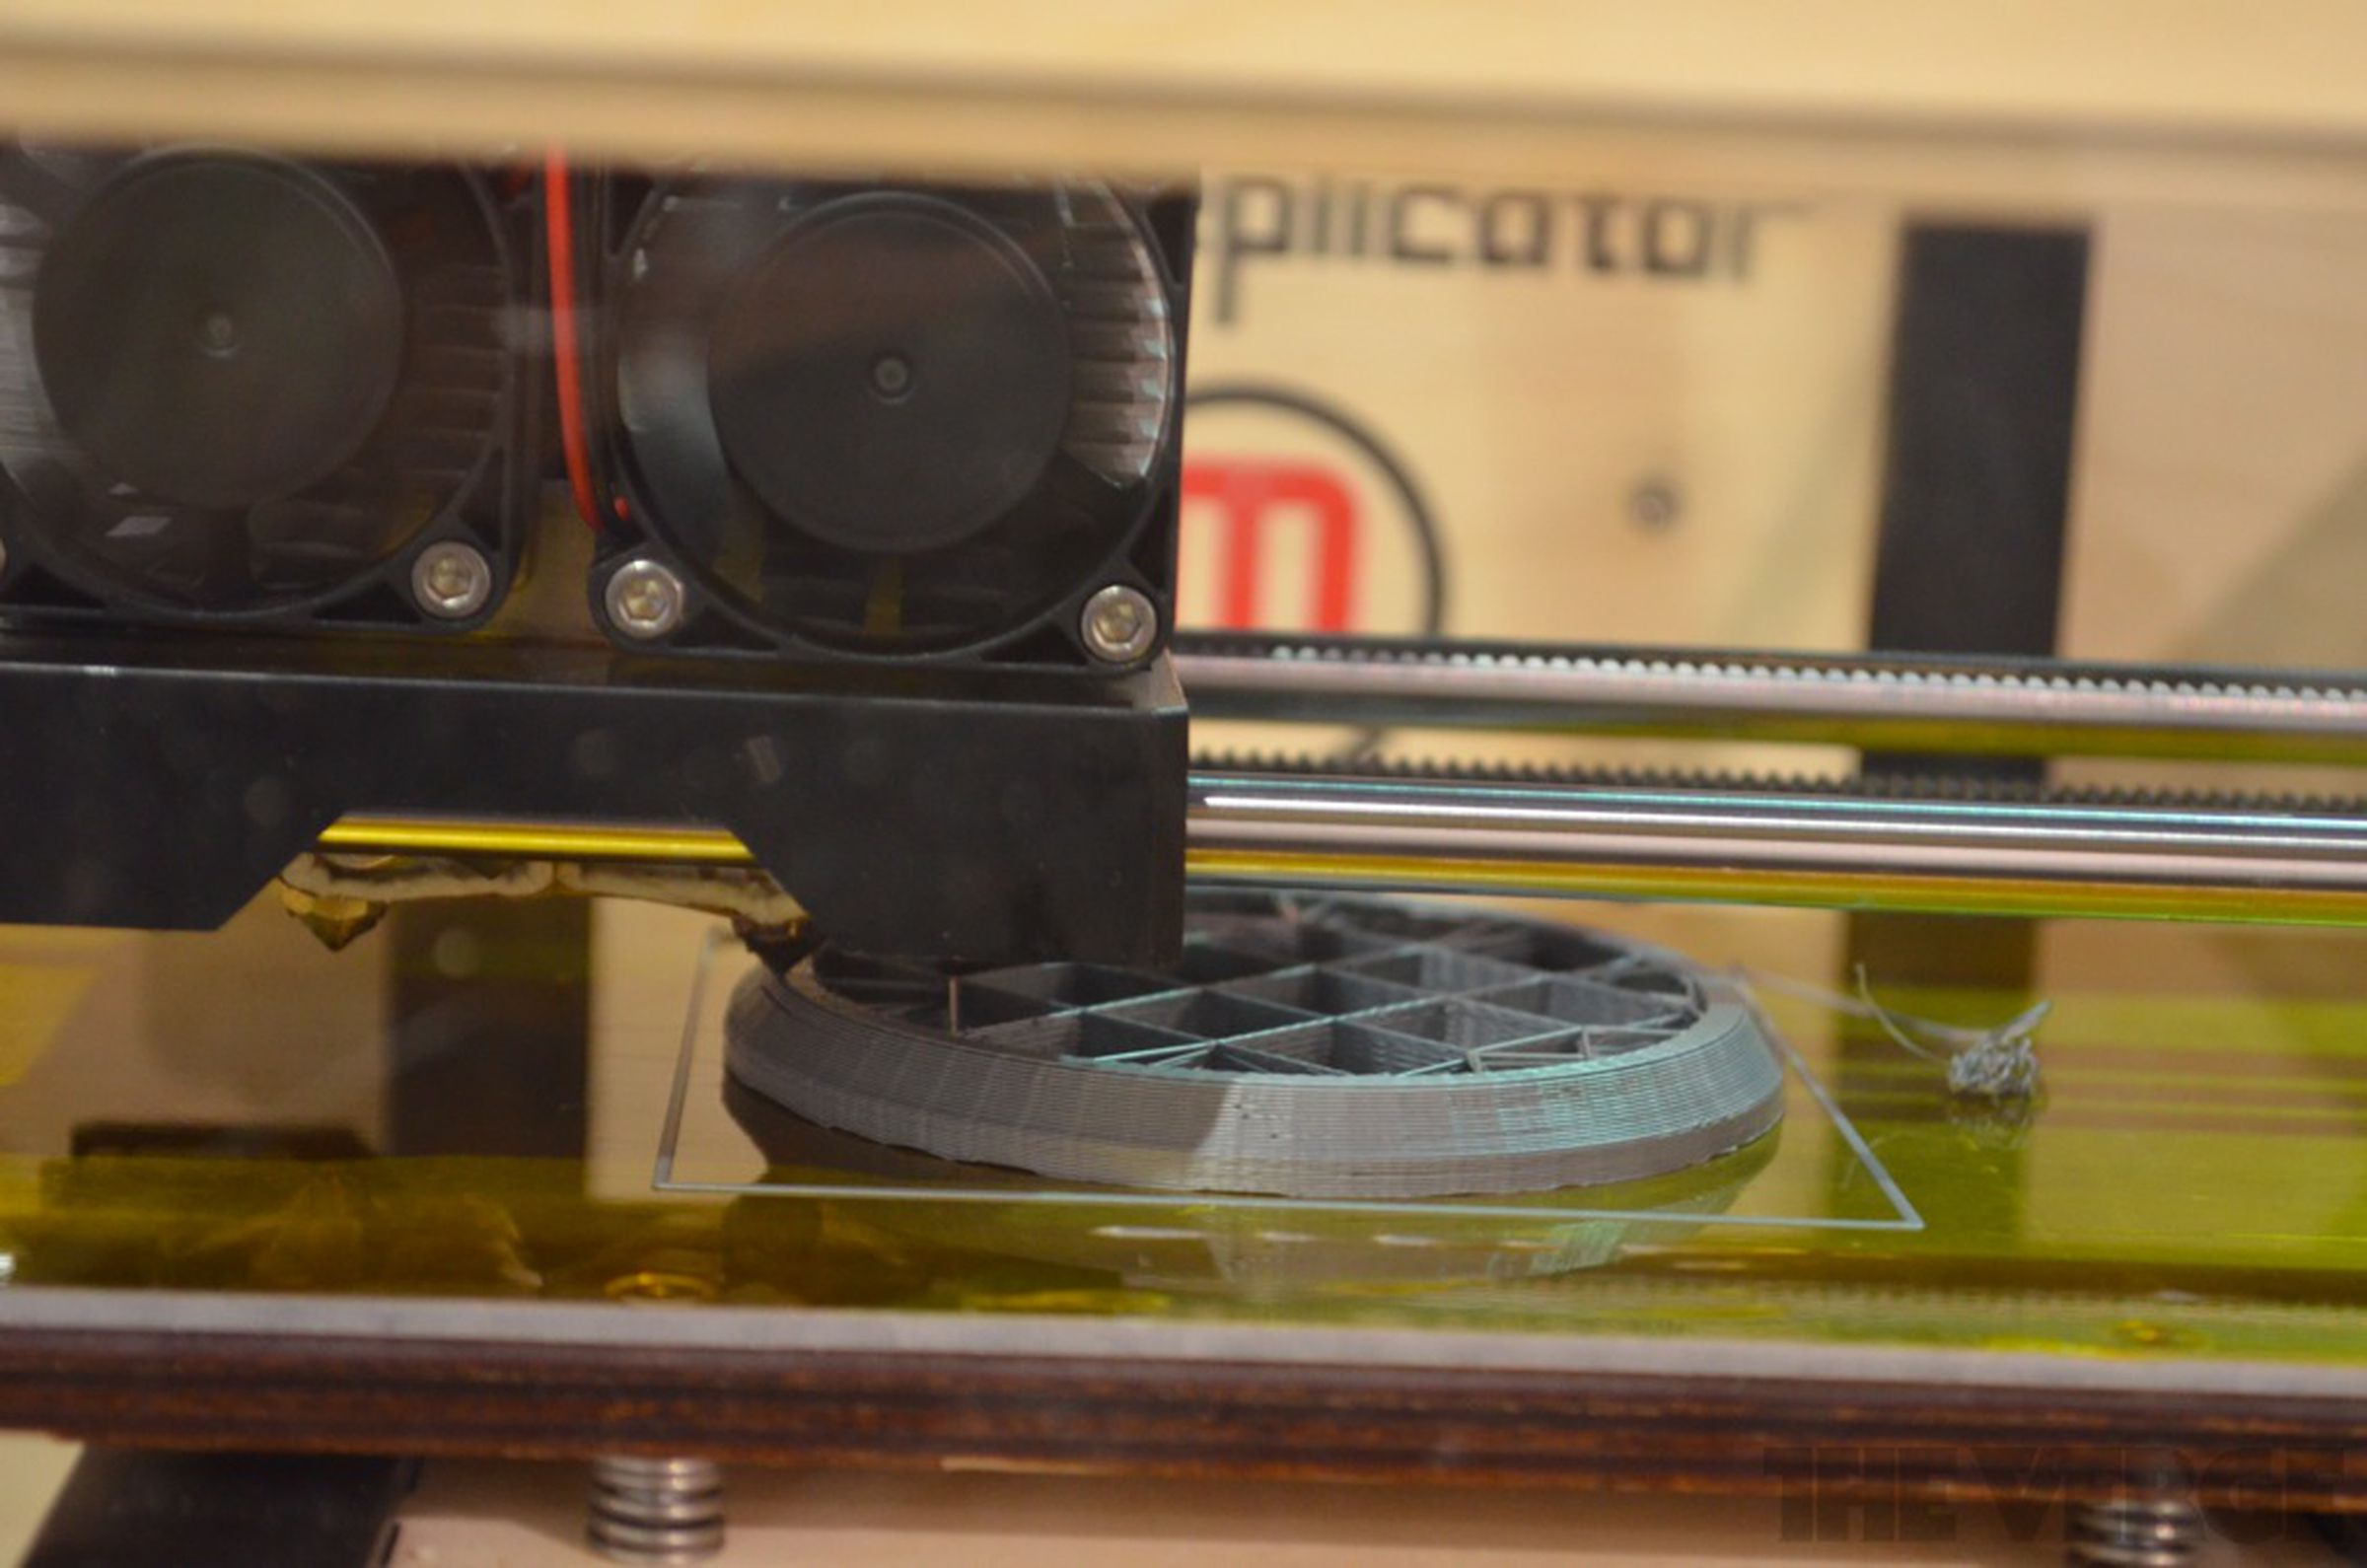 MakerBot Replicator hands-on pictures 